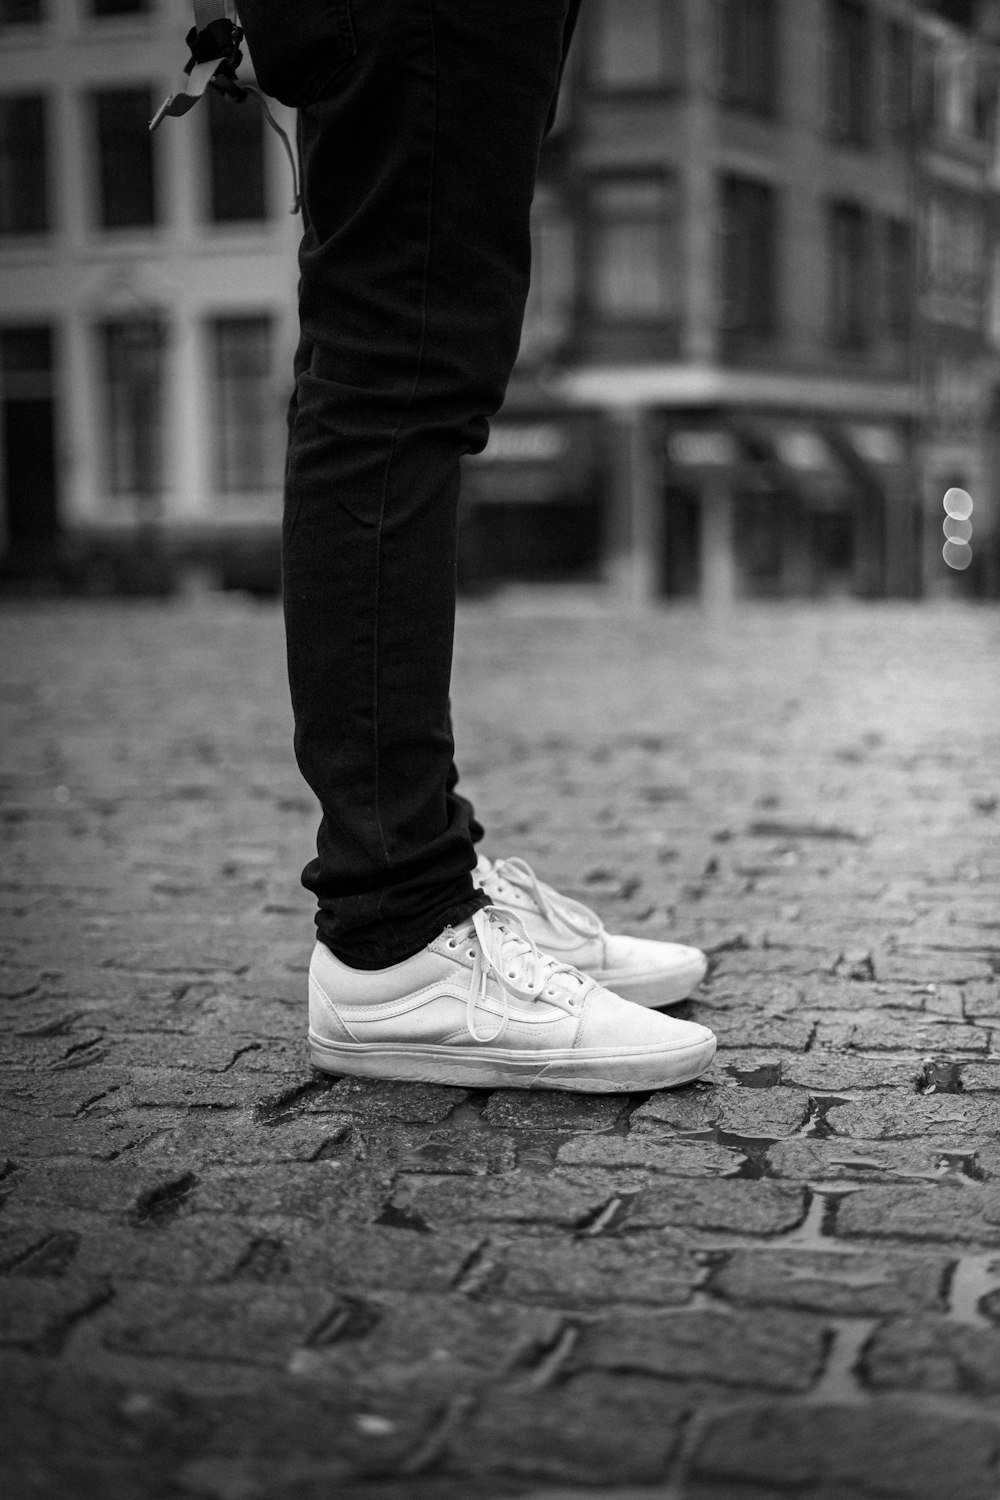 grayscale photography of standing person wearing low-top sneakers